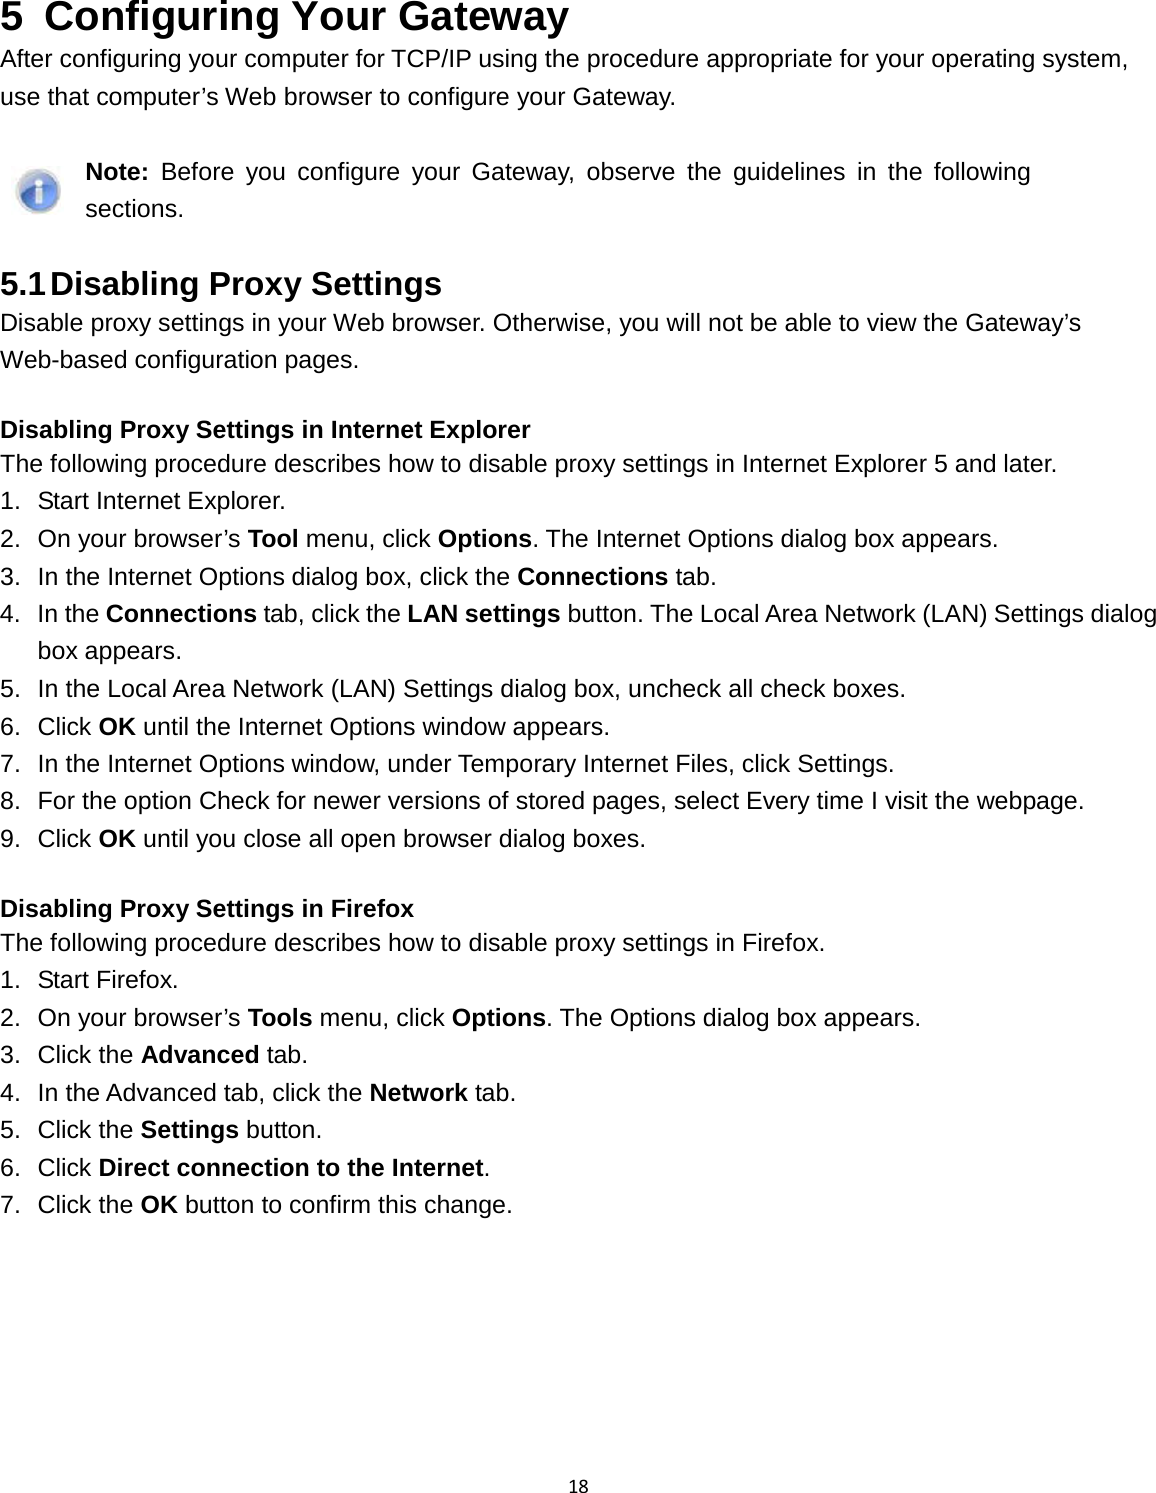 18  5  Configuring Your Gateway After configuring your computer for TCP/IP using the procedure appropriate for your operating system, use that computer’s Web browser to configure your Gateway.   Note: Before you configure your Gateway, observe the guidelines in the following sections.  5.1 Disabling Proxy Settings Disable proxy settings in your Web browser. Otherwise, you will not be able to view the Gateway’s Web-based configuration pages.  Disabling Proxy Settings in Internet Explorer The following procedure describes how to disable proxy settings in Internet Explorer 5 and later. 1. Start Internet Explorer. 2. On your browser’s Tool menu, click Options. The Internet Options dialog box appears. 3. In the Internet Options dialog box, click the Connections tab. 4. In the Connections tab, click the LAN settings button. The Local Area Network (LAN) Settings dialog box appears. 5. In the Local Area Network (LAN) Settings dialog box, uncheck all check boxes. 6. Click OK until the Internet Options window appears. 7. In the Internet Options window, under Temporary Internet Files, click Settings. 8. For the option Check for newer versions of stored pages, select Every time I visit the webpage. 9. Click OK until you close all open browser dialog boxes.  Disabling Proxy Settings in Firefox The following procedure describes how to disable proxy settings in Firefox. 1. Start Firefox. 2. On your browser’s Tools menu, click Options. The Options dialog box appears. 3. Click the Advanced tab. 4. In the Advanced tab, click the Network tab. 5. Click the Settings button. 6. Click Direct connection to the Internet. 7. Click the OK button to confirm this change.  